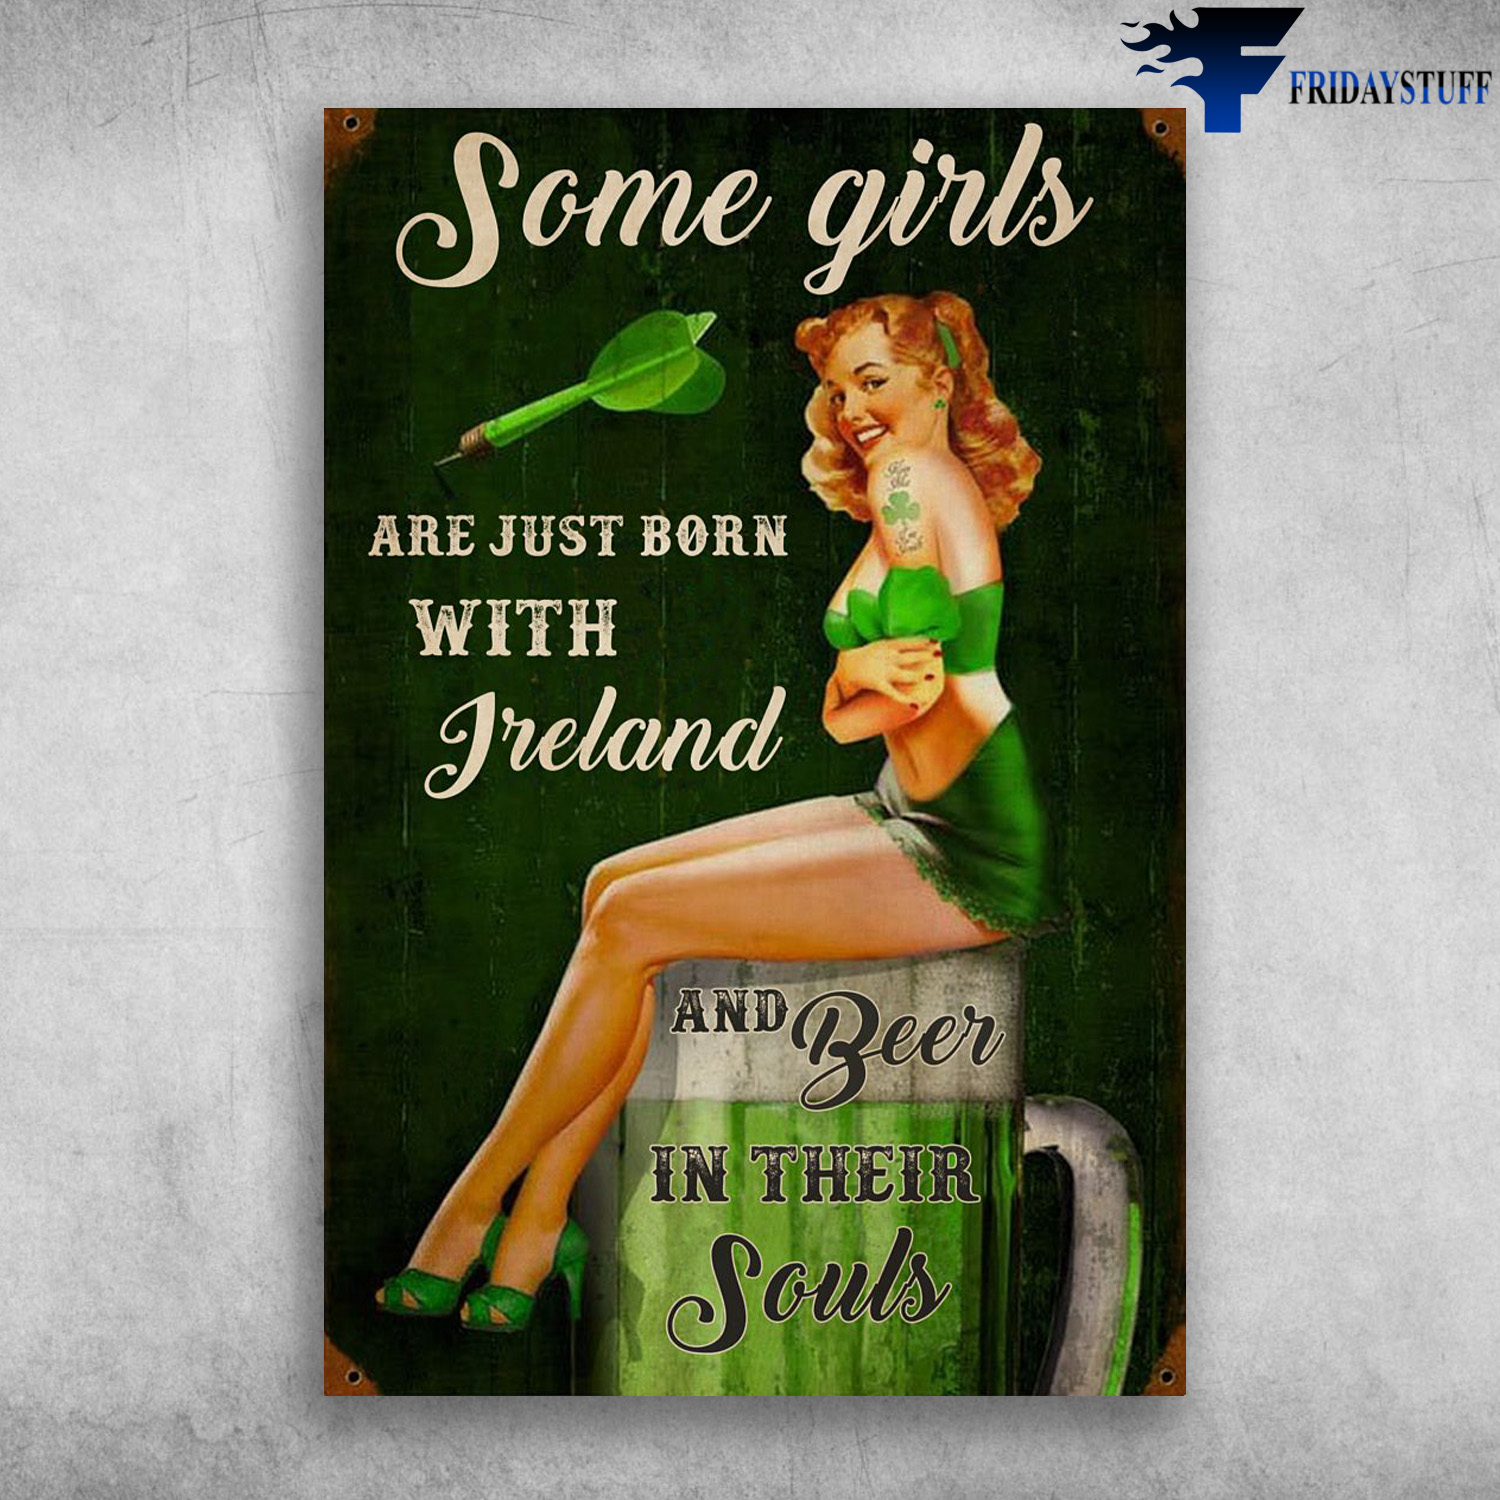 Irish Girl - Some Girls Are Just Born With Ireland And Beer In Their Souls, Saint Patrick’s Day, Irish, Patriots’ Day